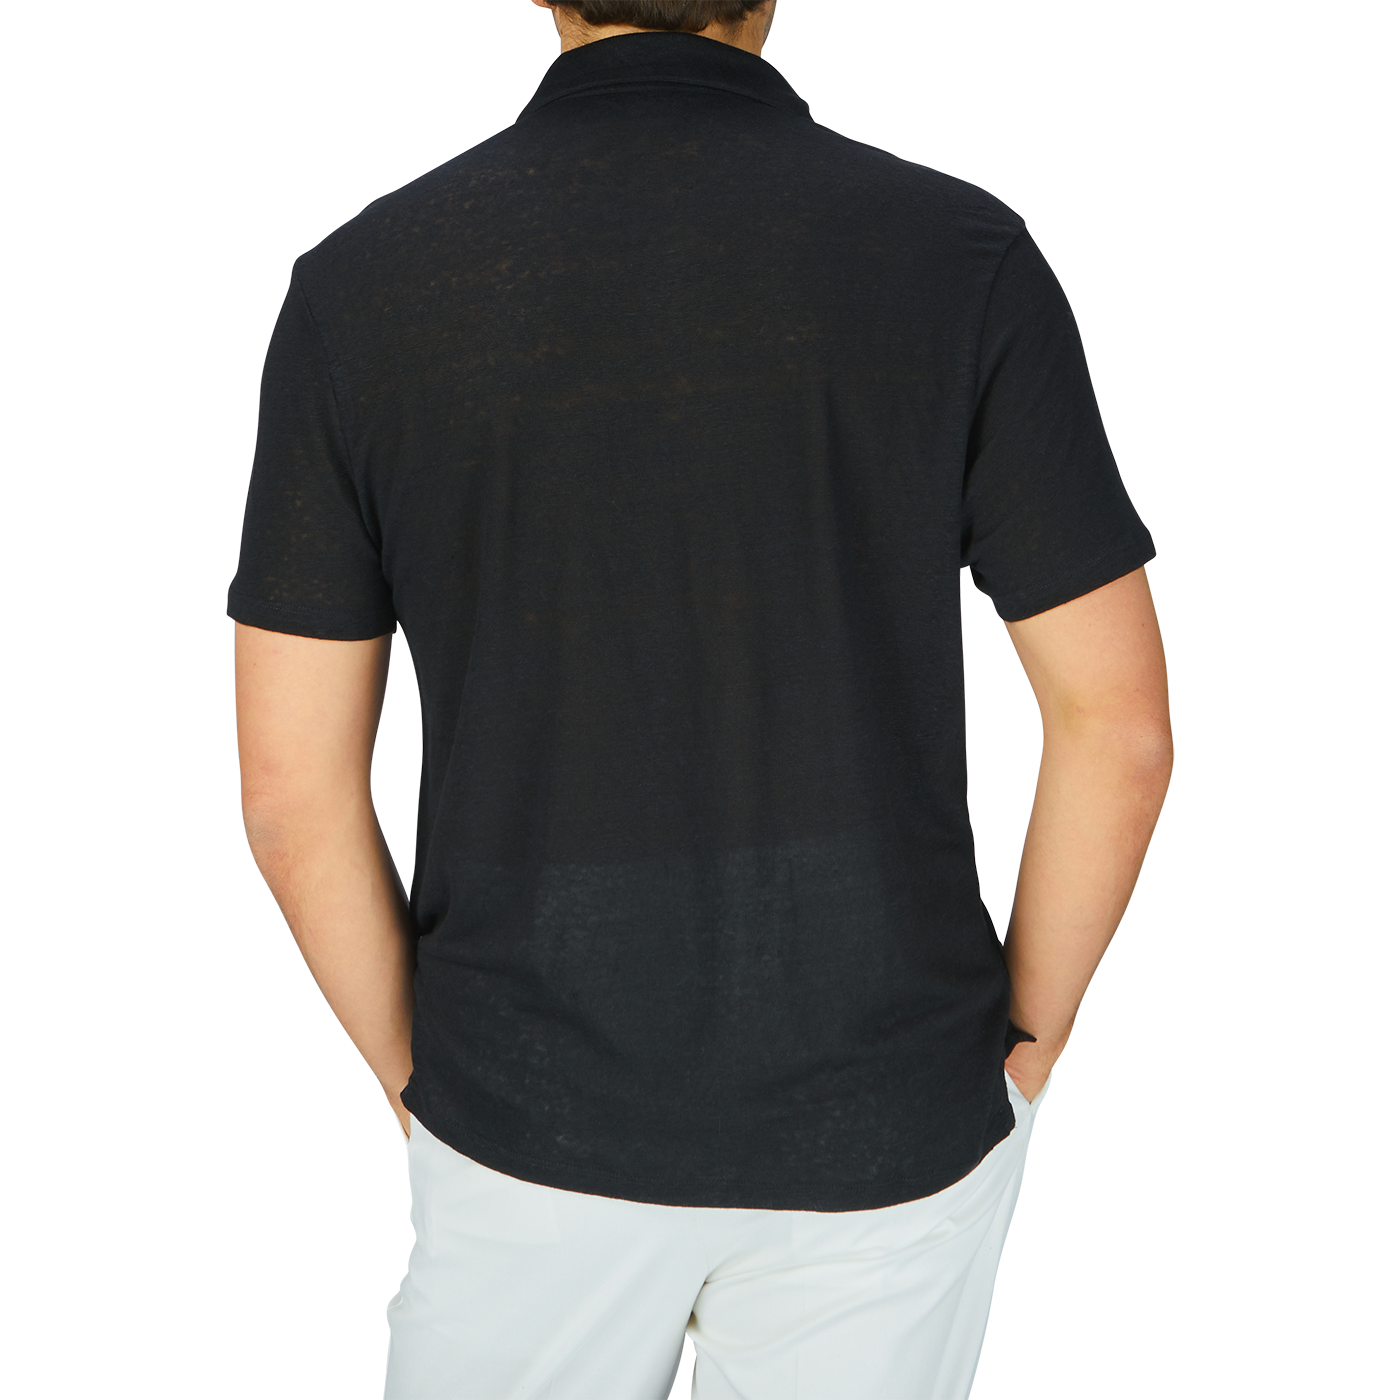 The man is wearing a Paige black linen Capri collar polo shirt, which is breathable and comfortable thanks to its linen fabric.